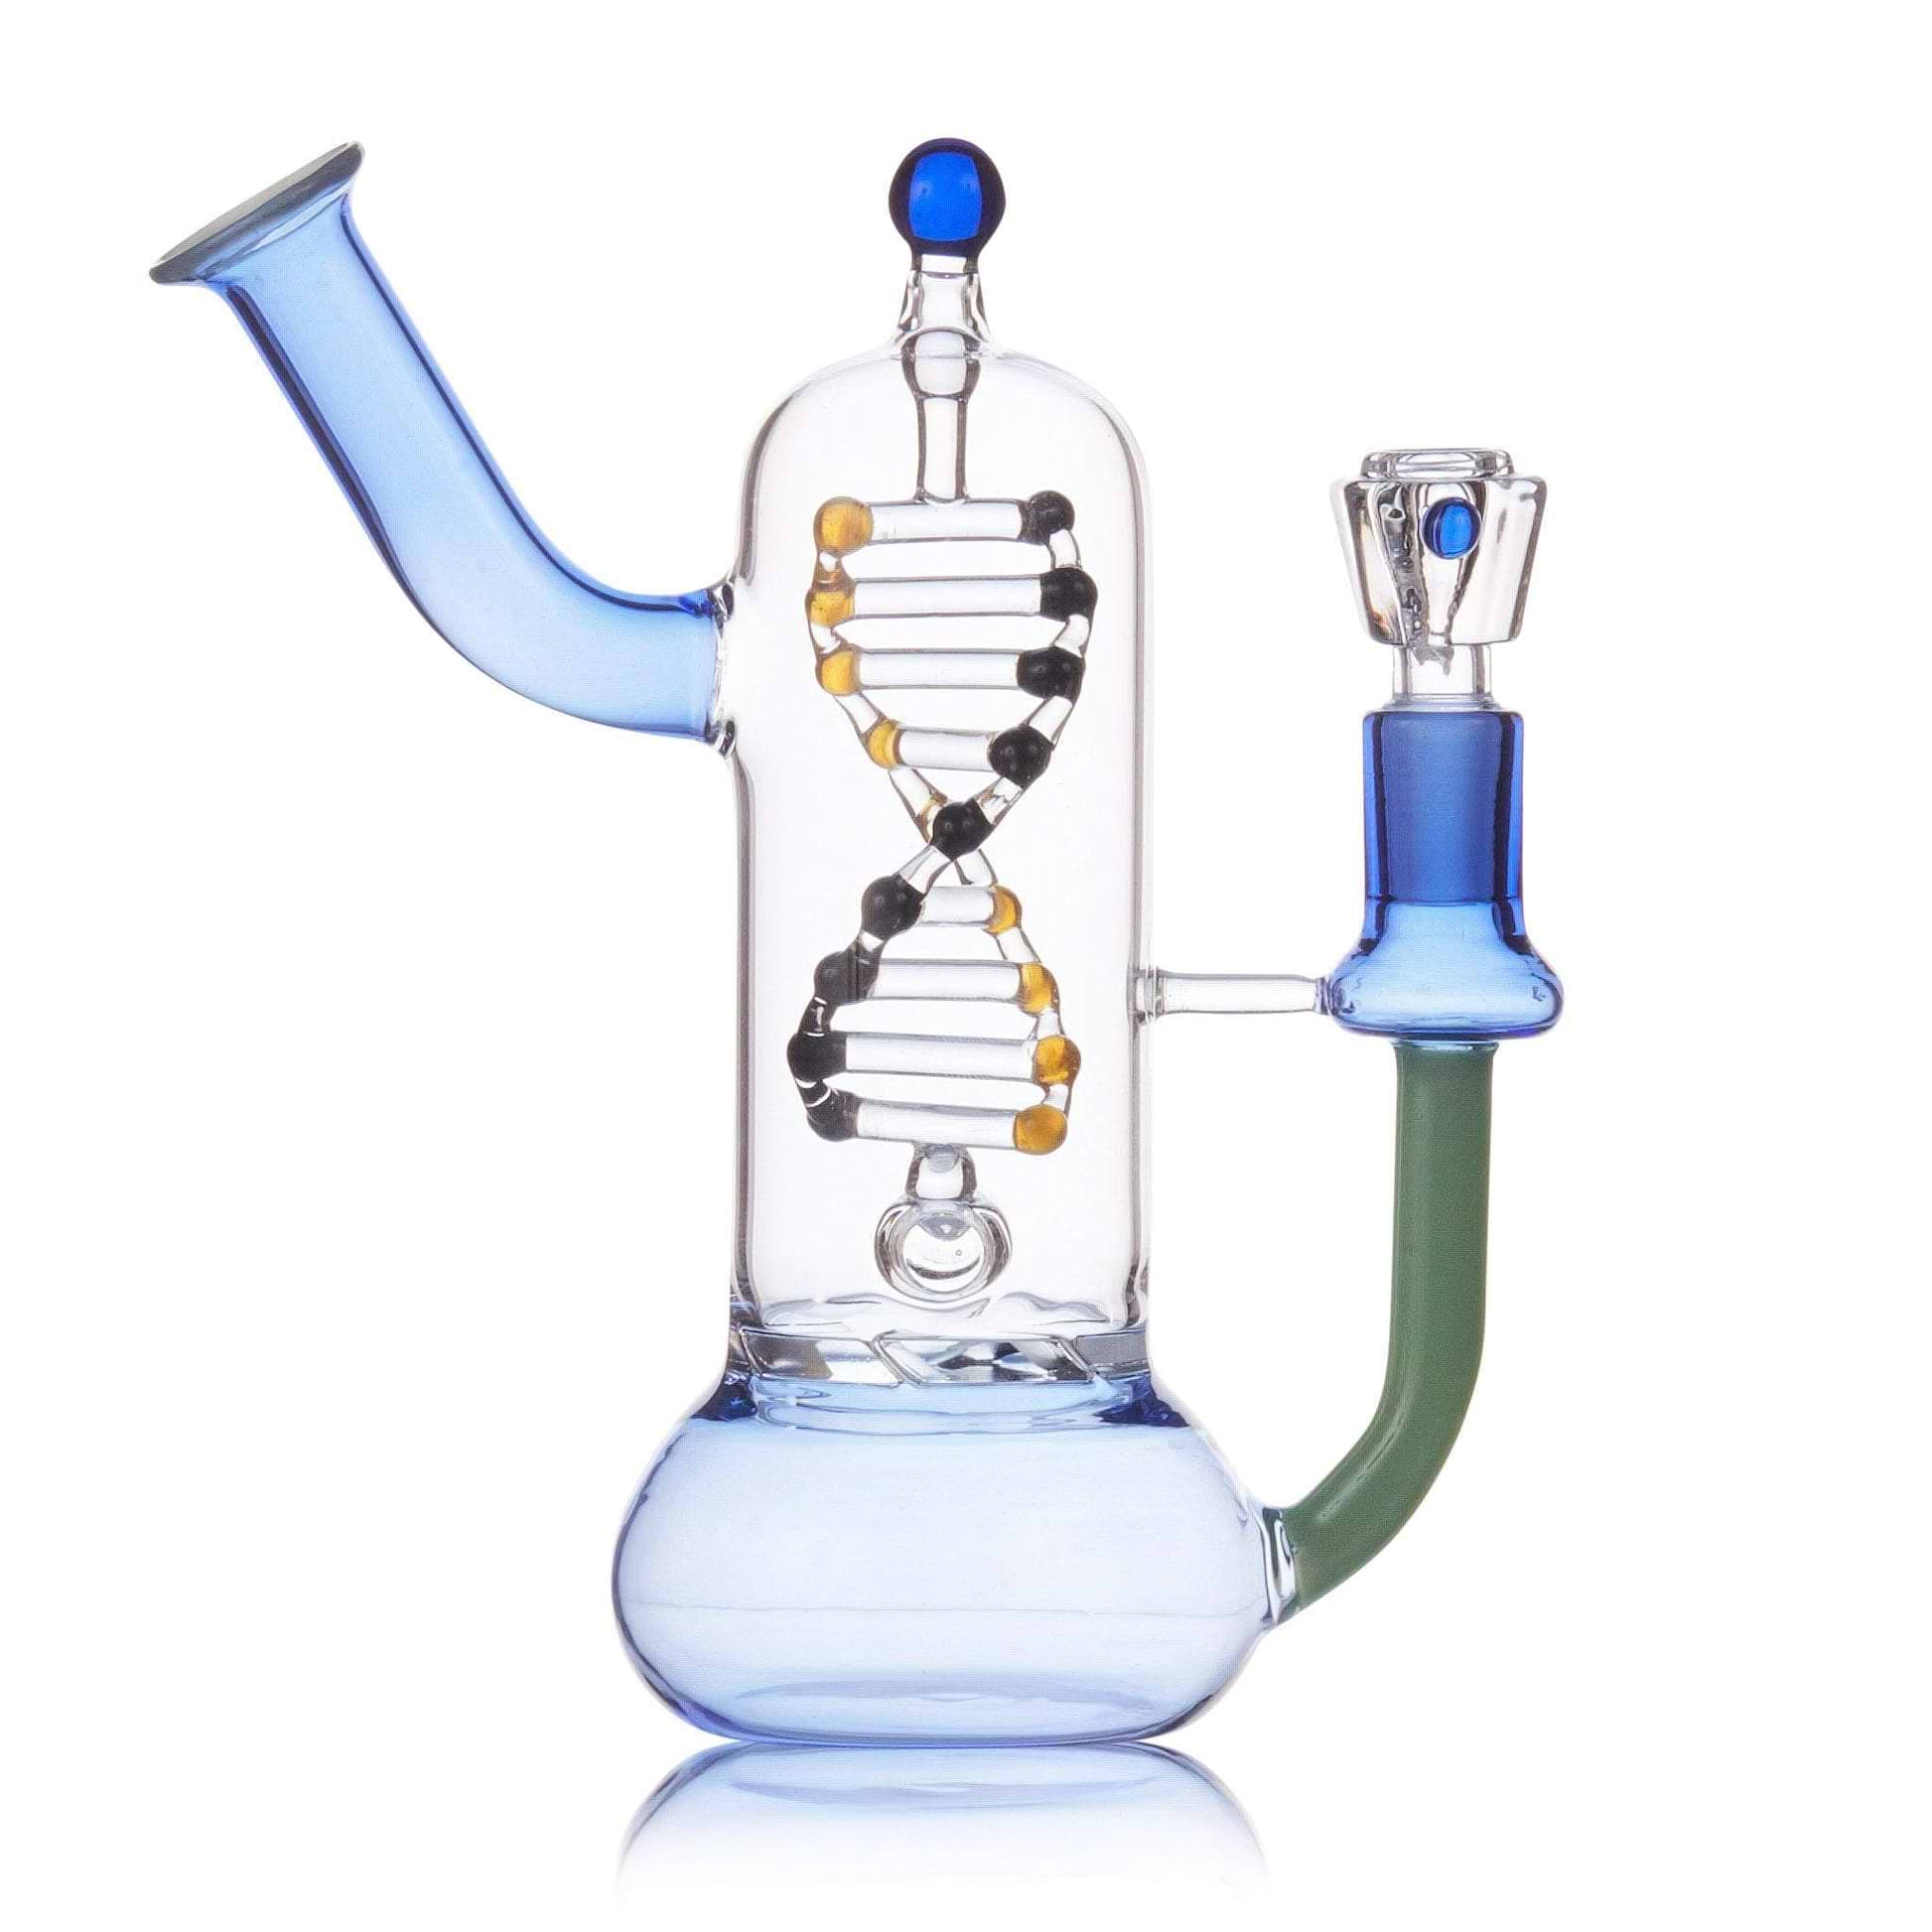 Portable 7-inch glass bong smoking device with spinning double helix DNA on turbine perc